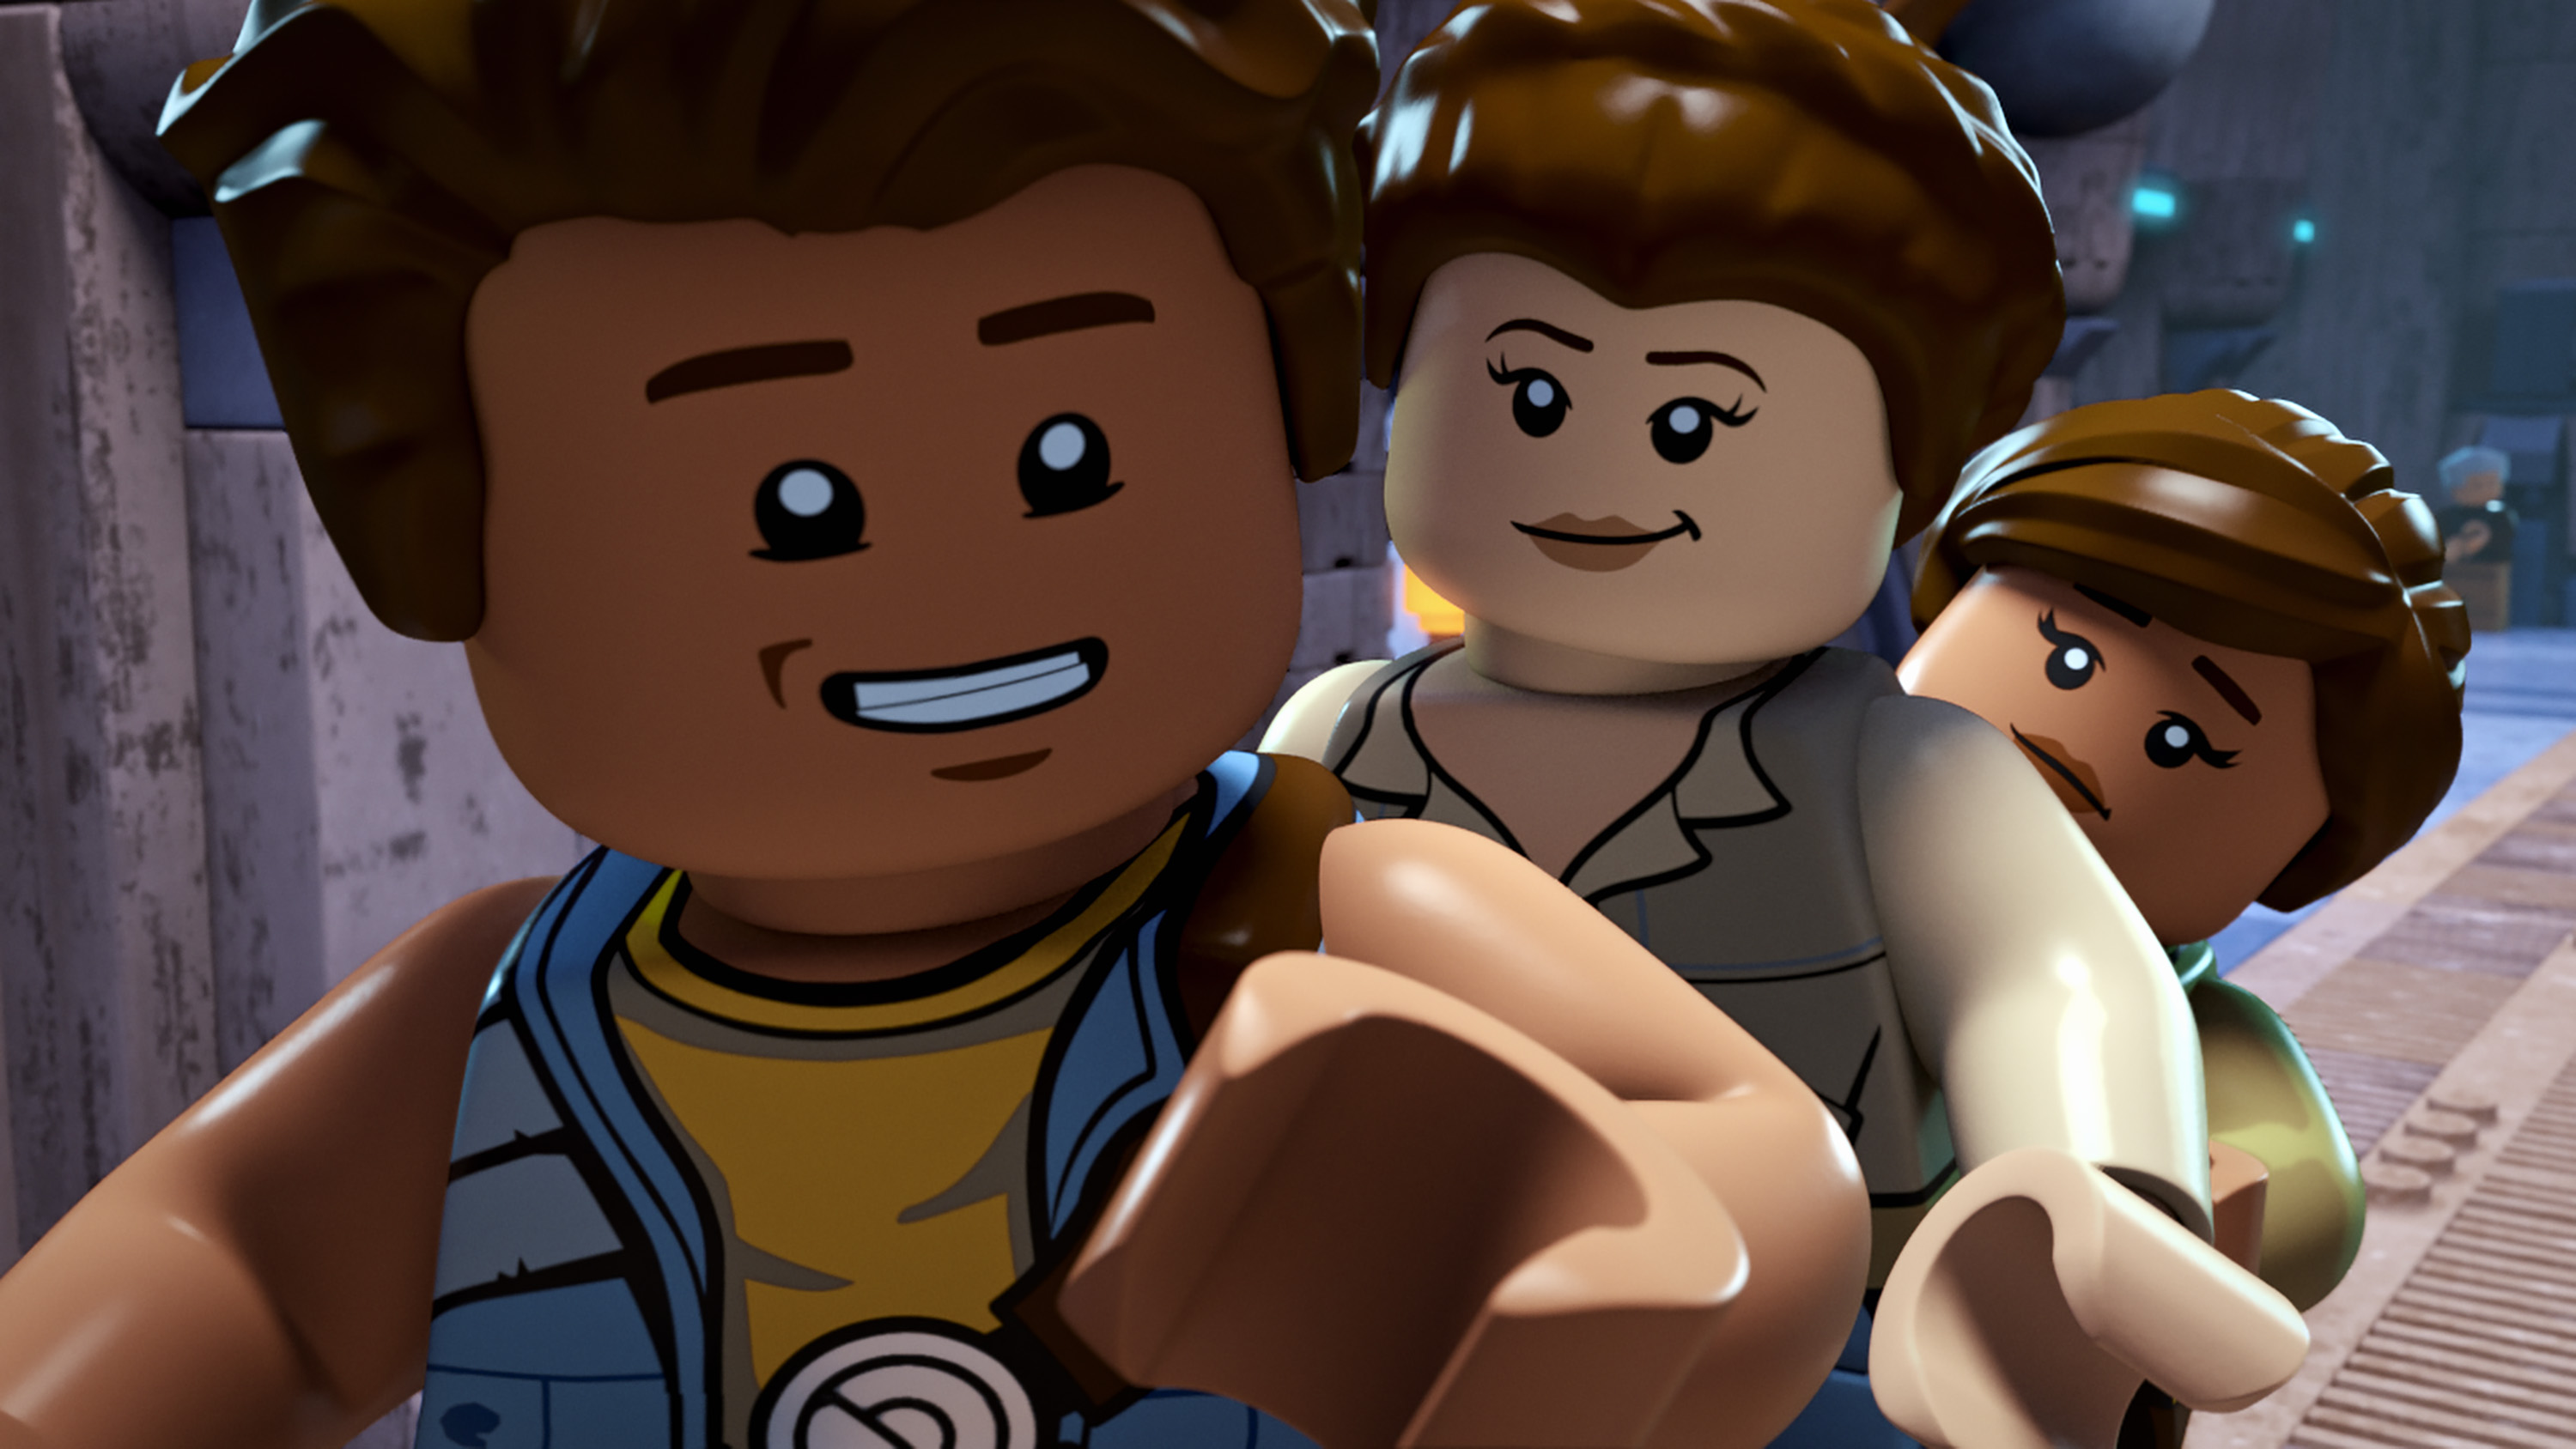 LEGO STAR WARS: THE FREEMAKER ADVENTURES - "Crossing Paths" - While on the run from Imperials, Luke and Leia show the Freemakers the selfless nature of the Force and the Rebellion. This episode of "LEGO Star Wars: The Freemaker Adventures" airs Monday, July 11 (10:00 - 10:30 A.M. EDT) on Disney XD. (Disney XD).